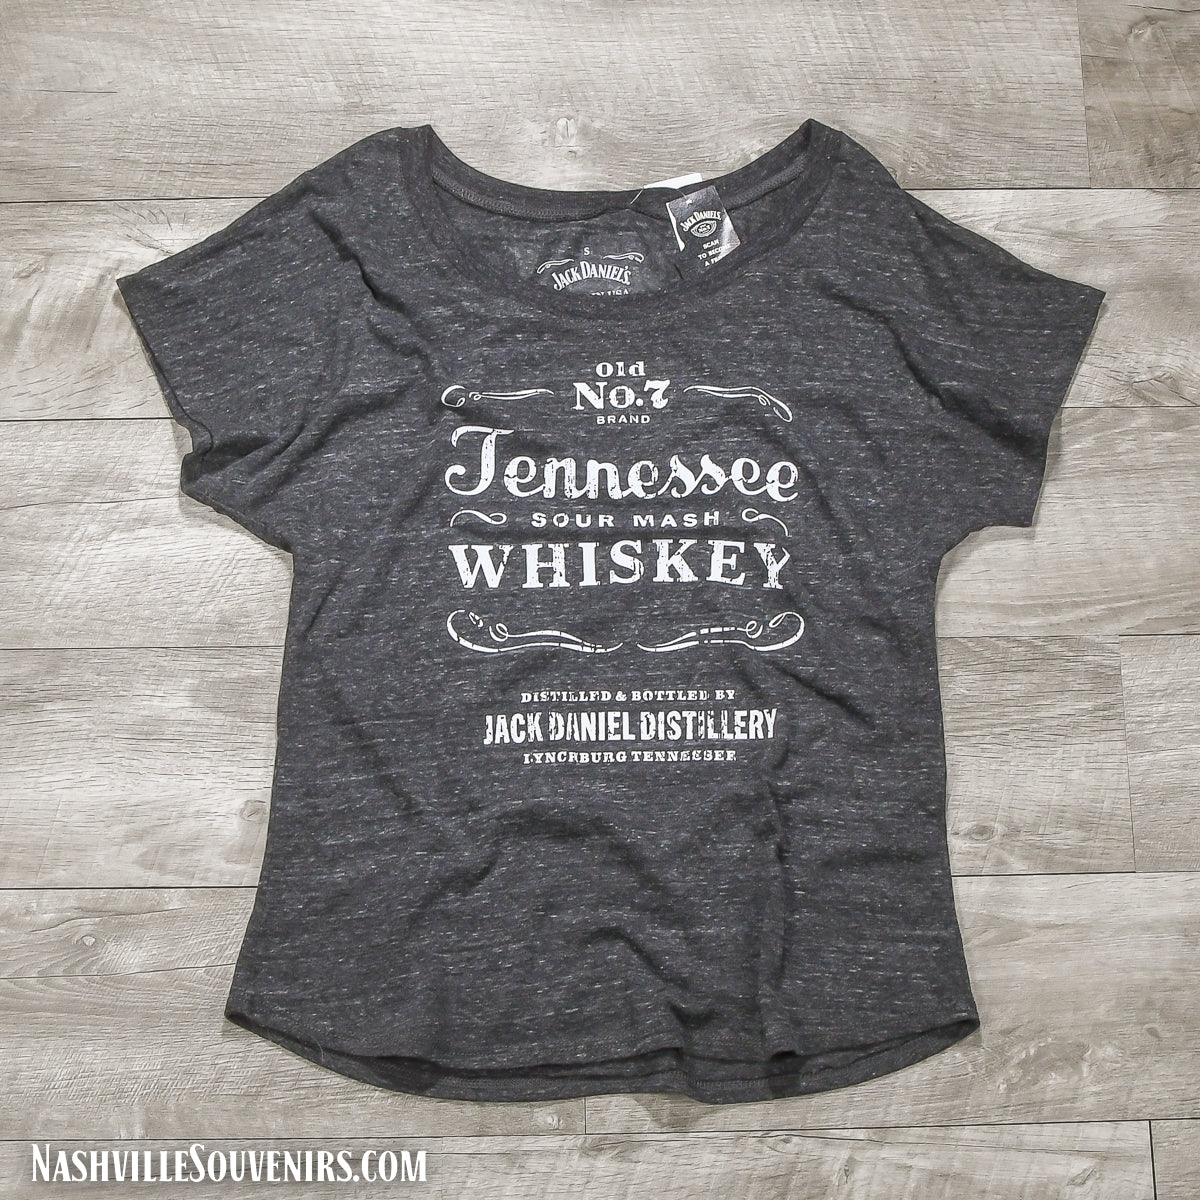 Officially licensed Jack Daniels Women's Sour Mash Whiskey T-Shirt in gray scoop neck. Get yours today with FREE SHIPPING on all US orders over $75!